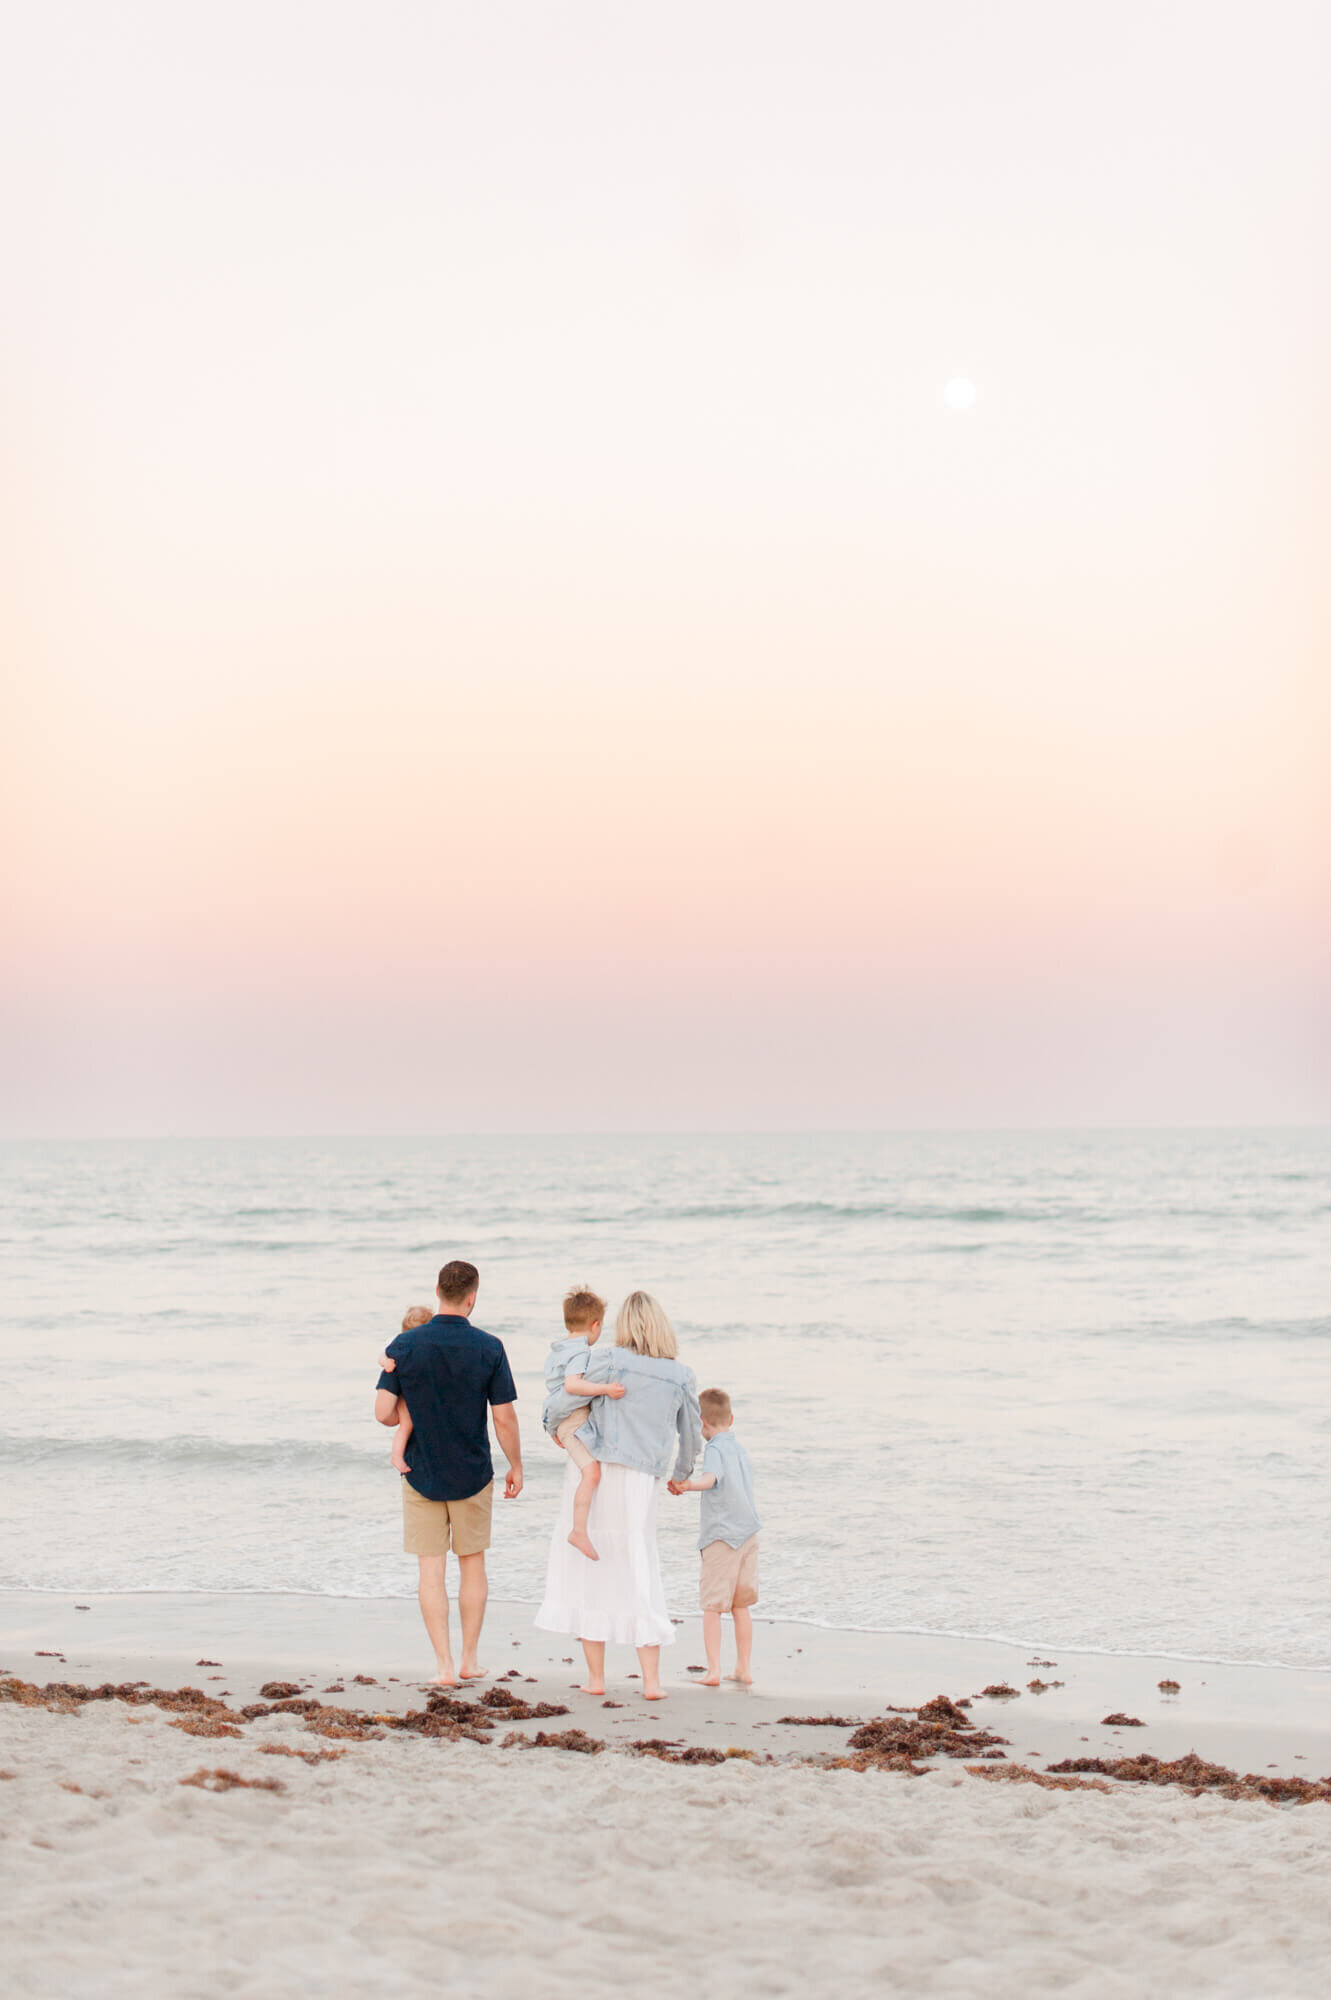 Family watching the waves and looking at the moon during their sunset session